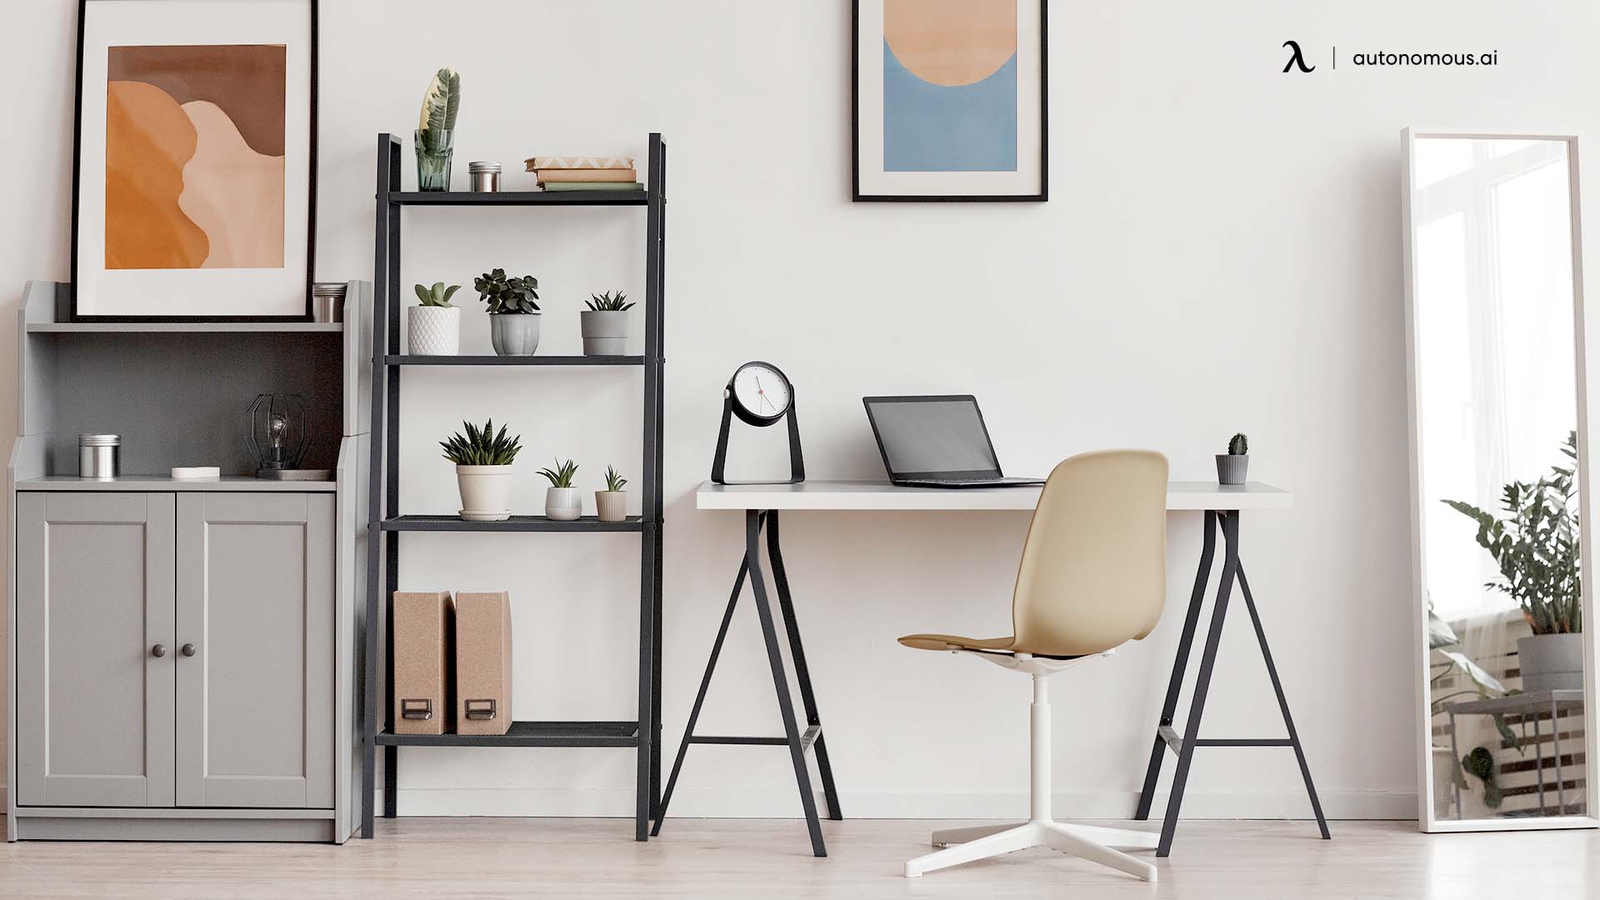 A Minimalist Desk Tour: The Complete Guide to Productive Workspace